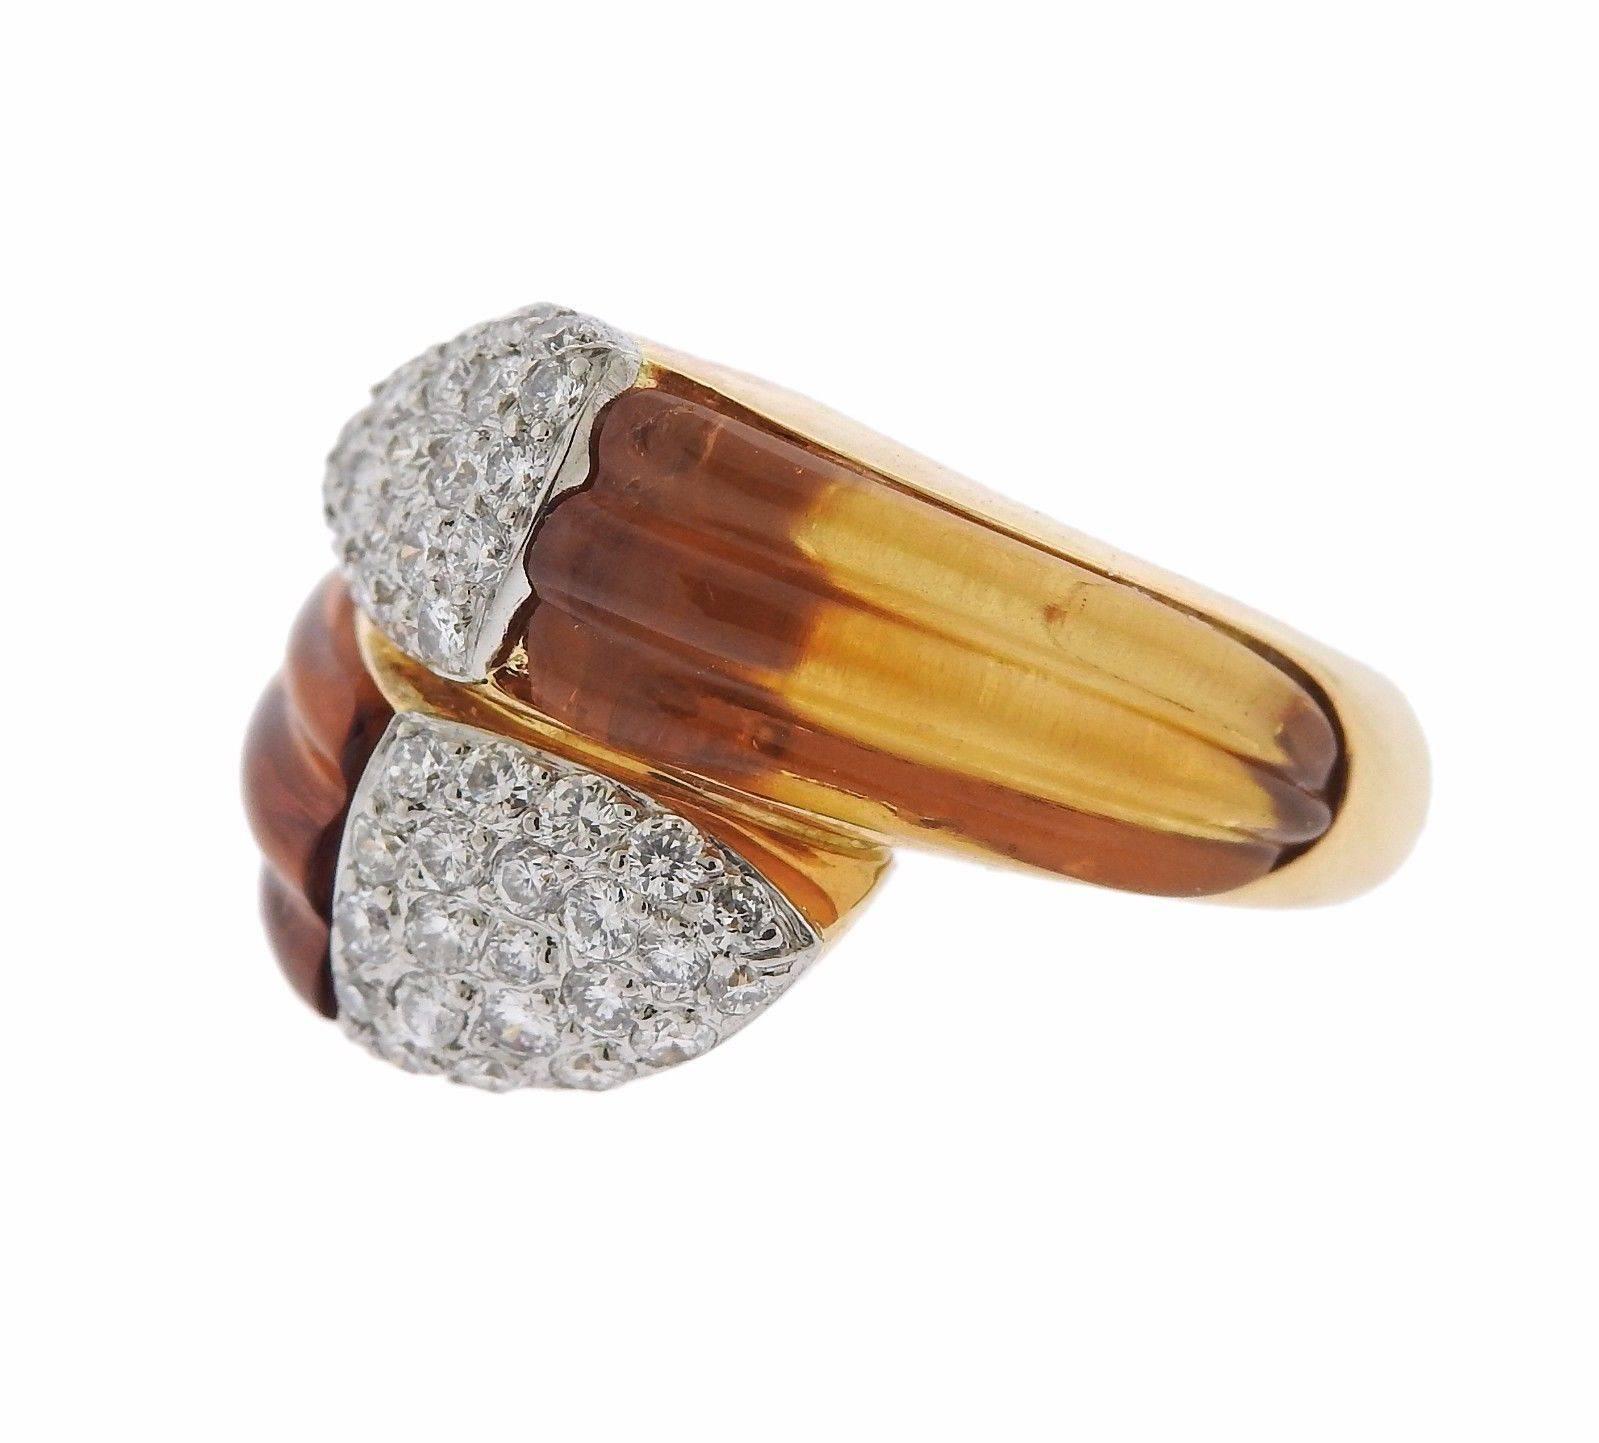 An 18k gold ring set with carved citrine 1.10ctw of GH/VS diamonds.  The ring is a size 6 and 16mm wide. The weight of the piece is 10.6 grams.  Marked: Gold hallmarks, 1.10.